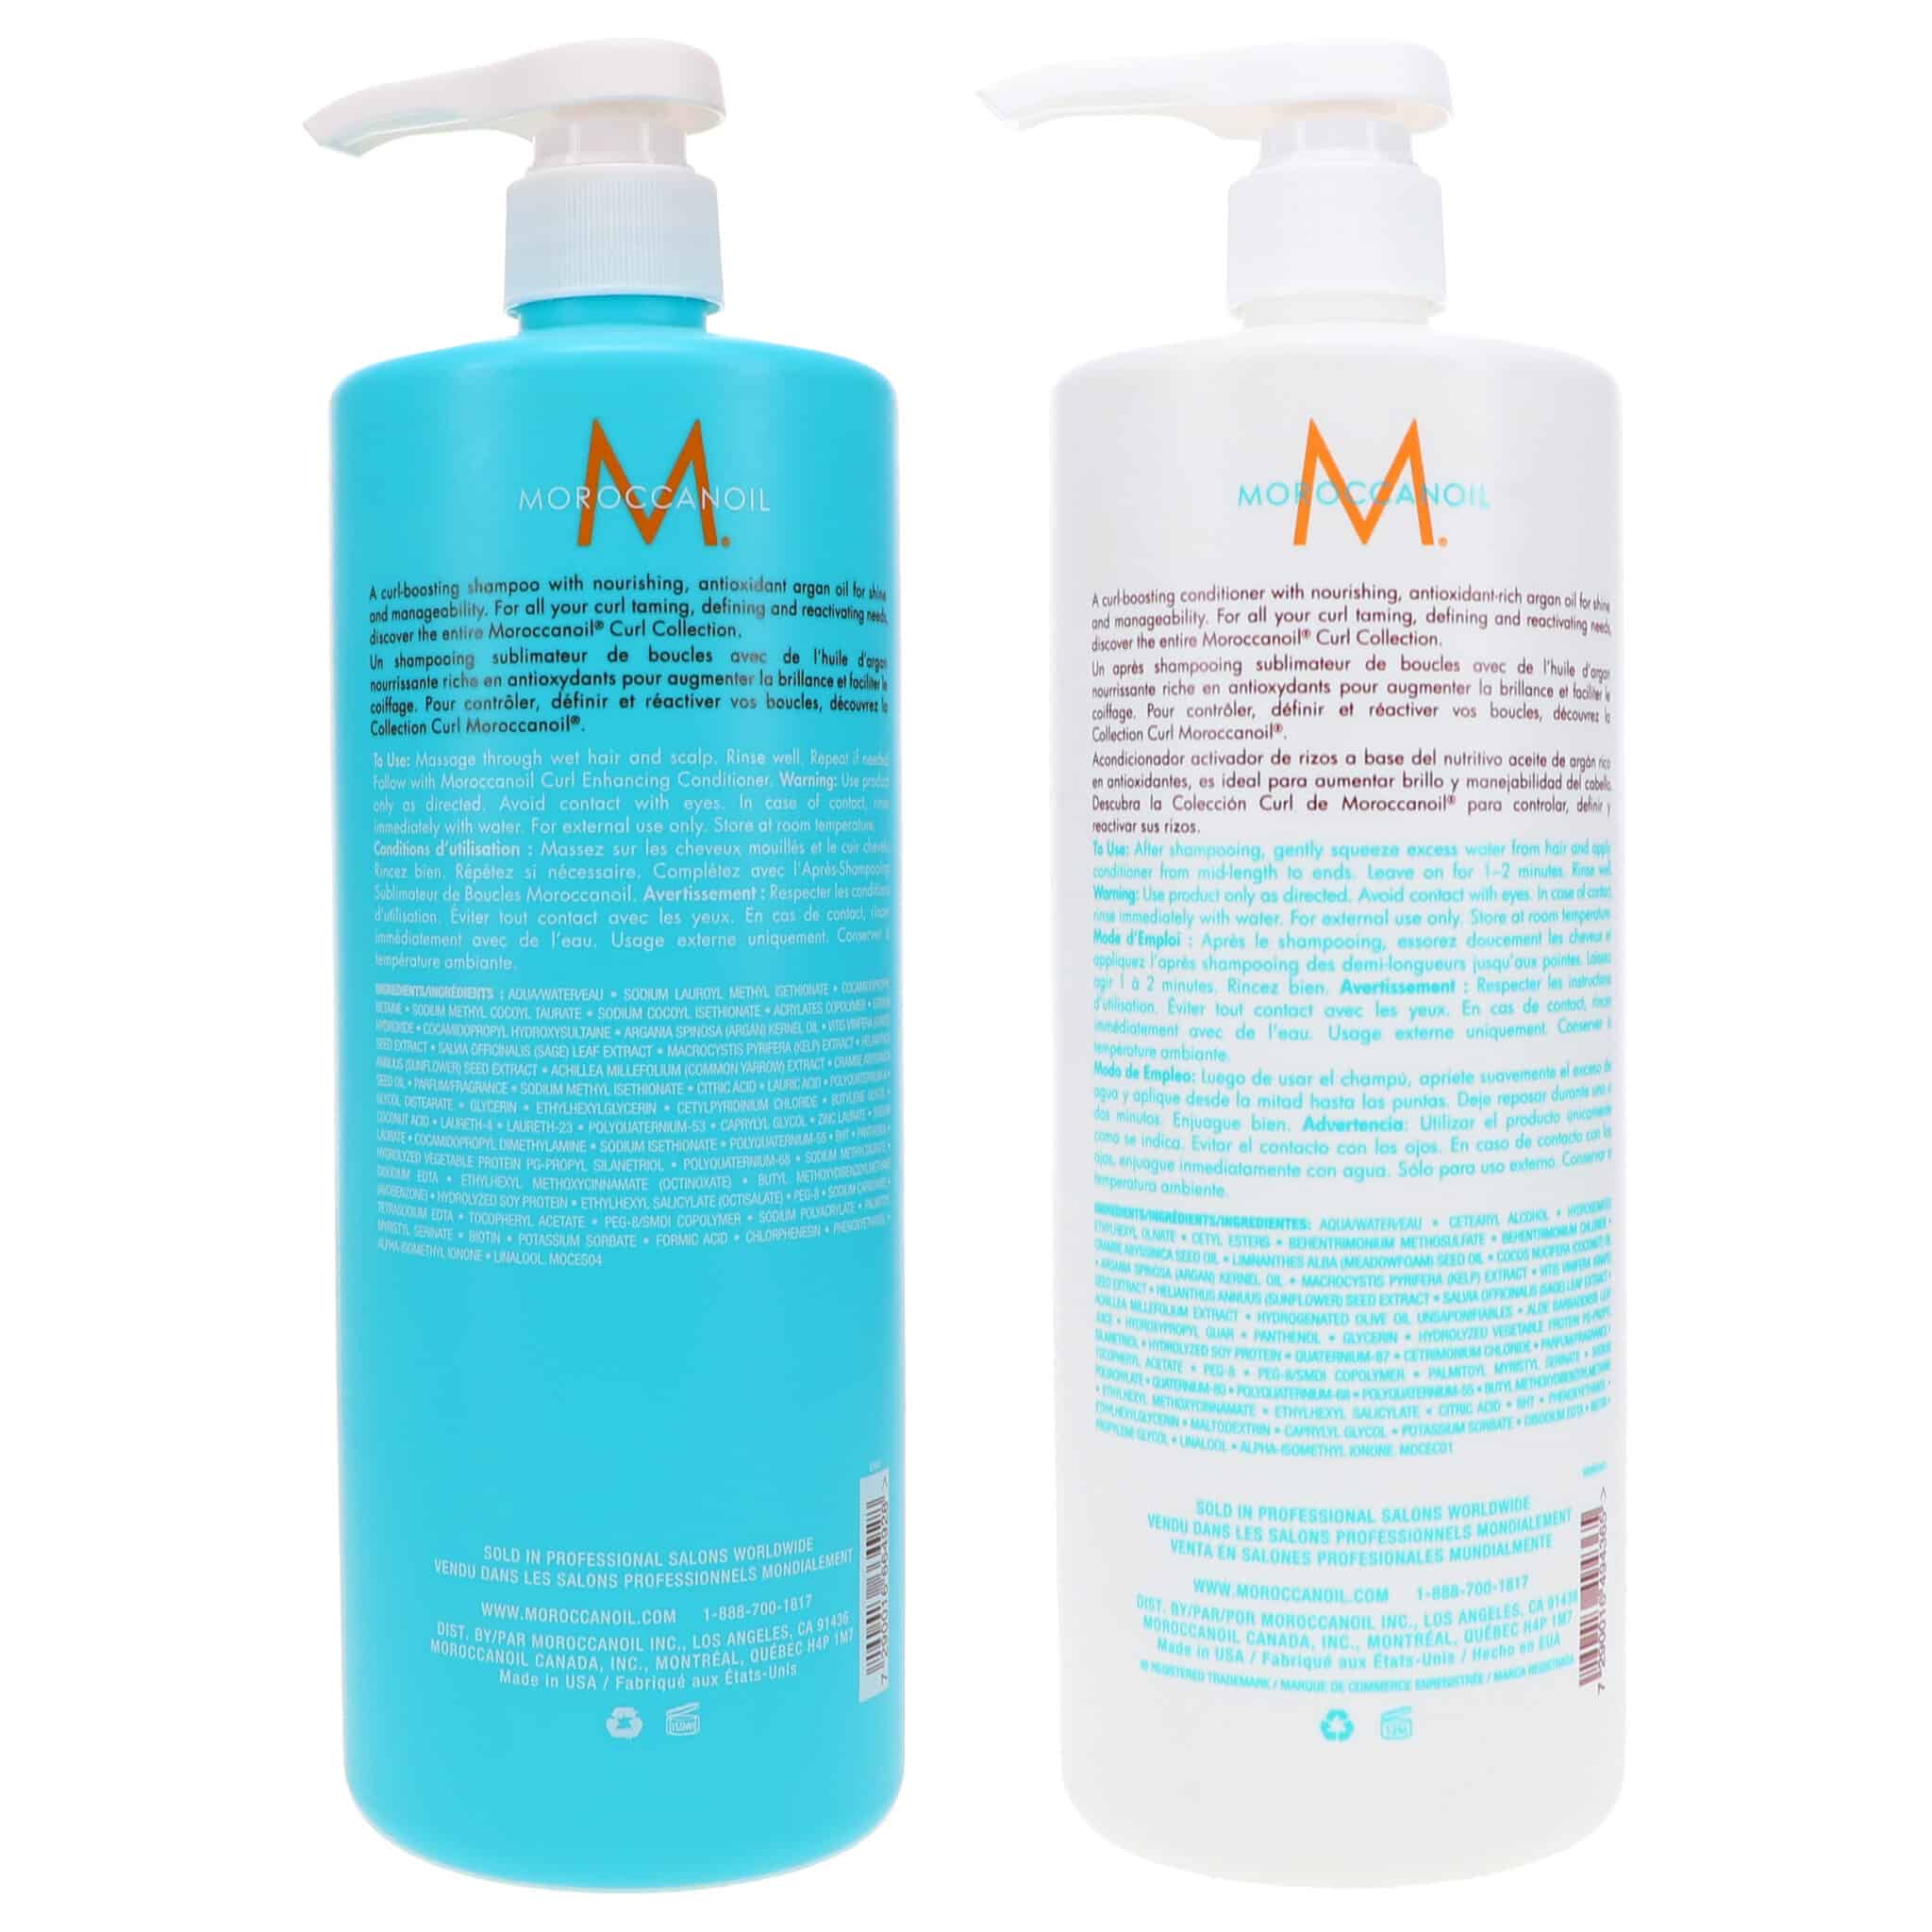 Moroccanoil Curl Enhancing Shampoo 338 Oz And Curl Enhancing Conditioner